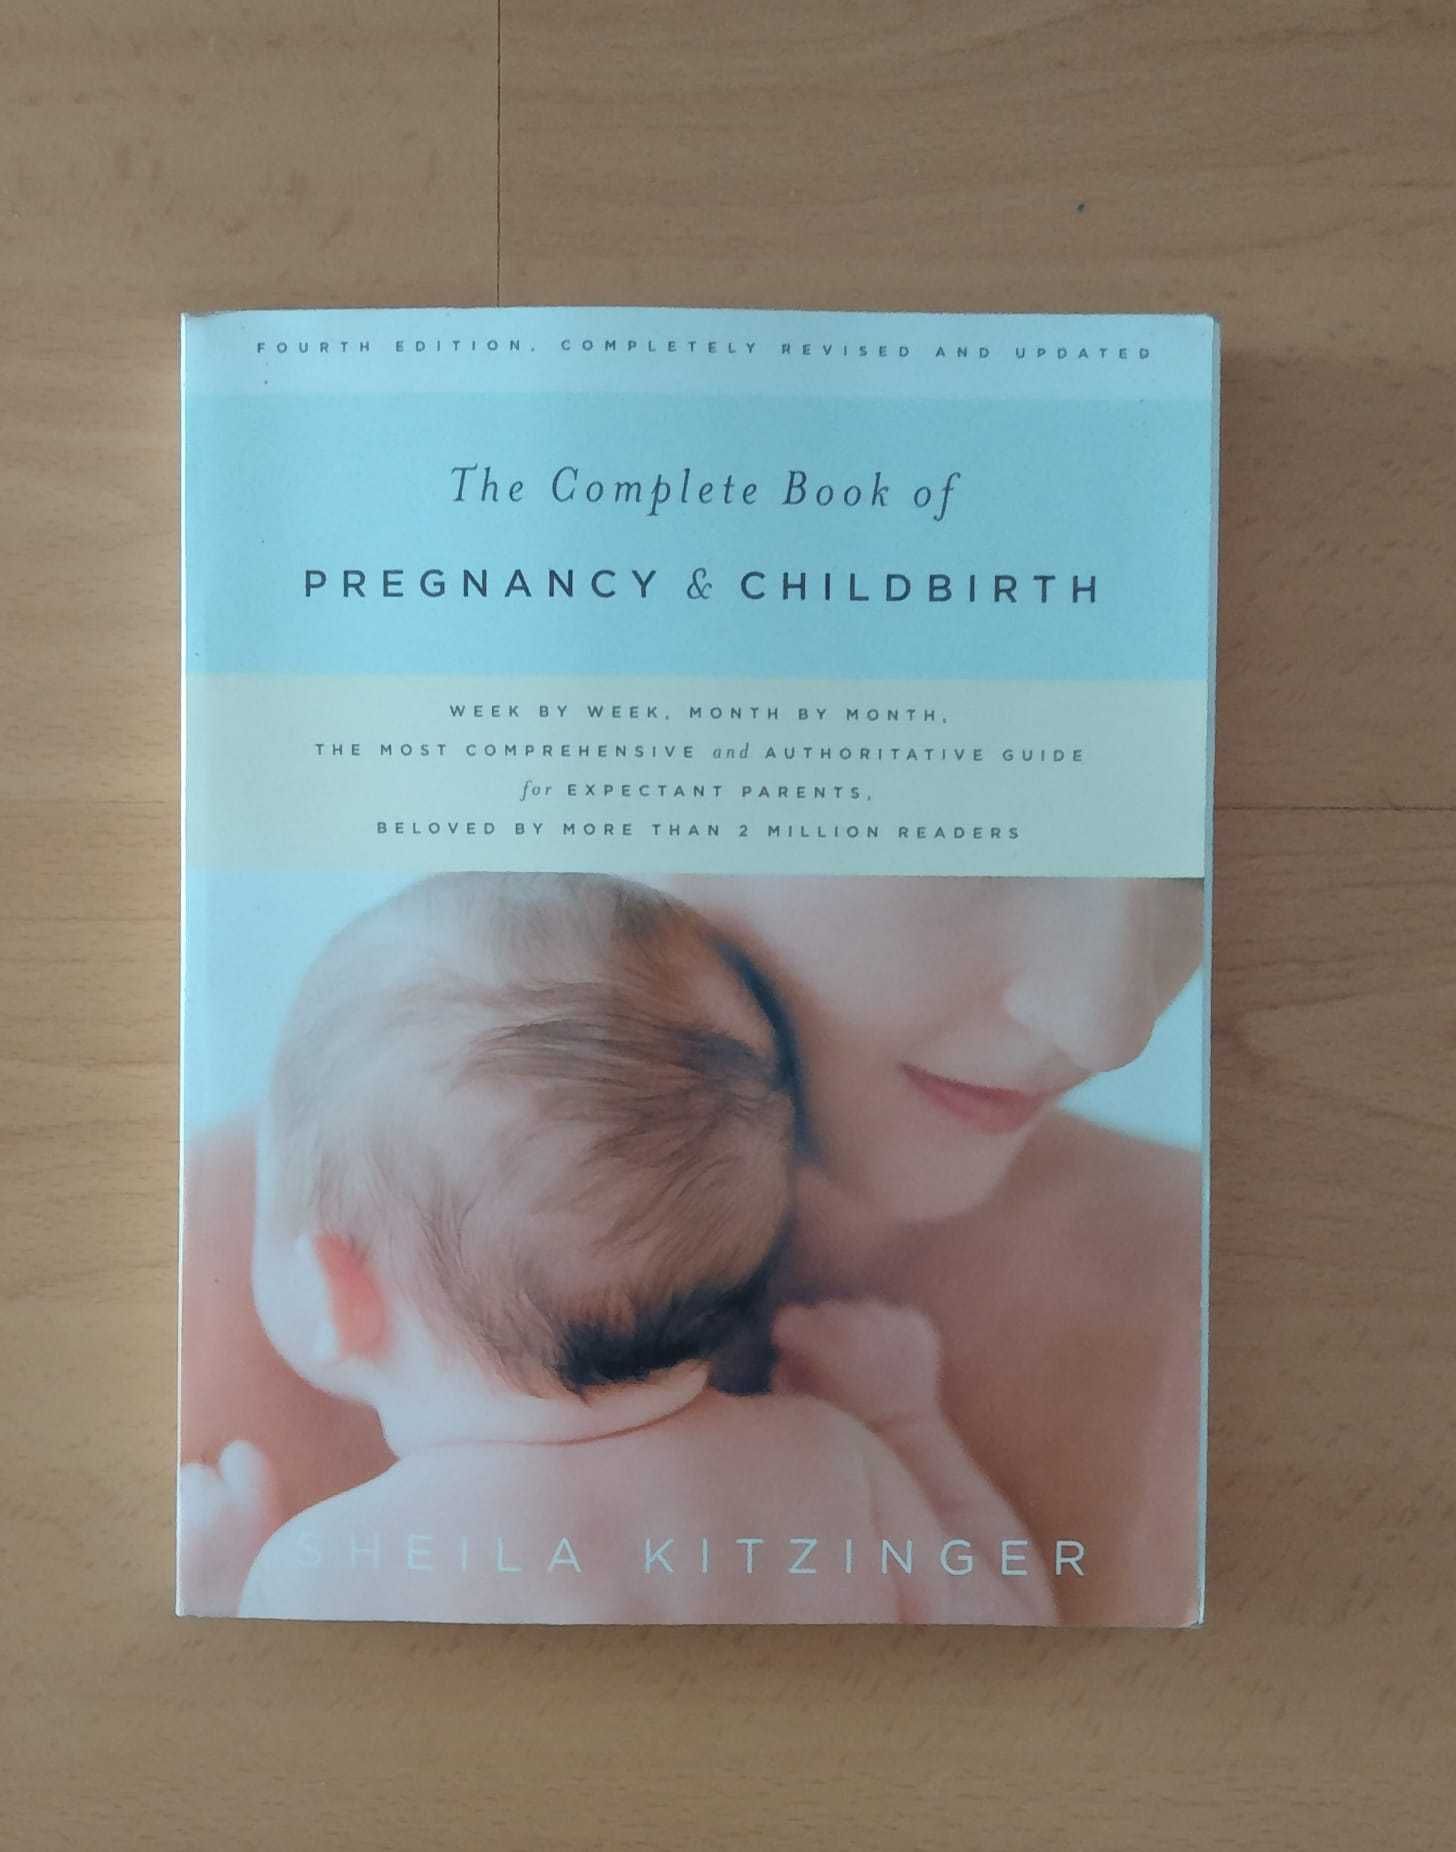 Sheila Kitzinger - The Complete Book of Pregnancy & Childbirth